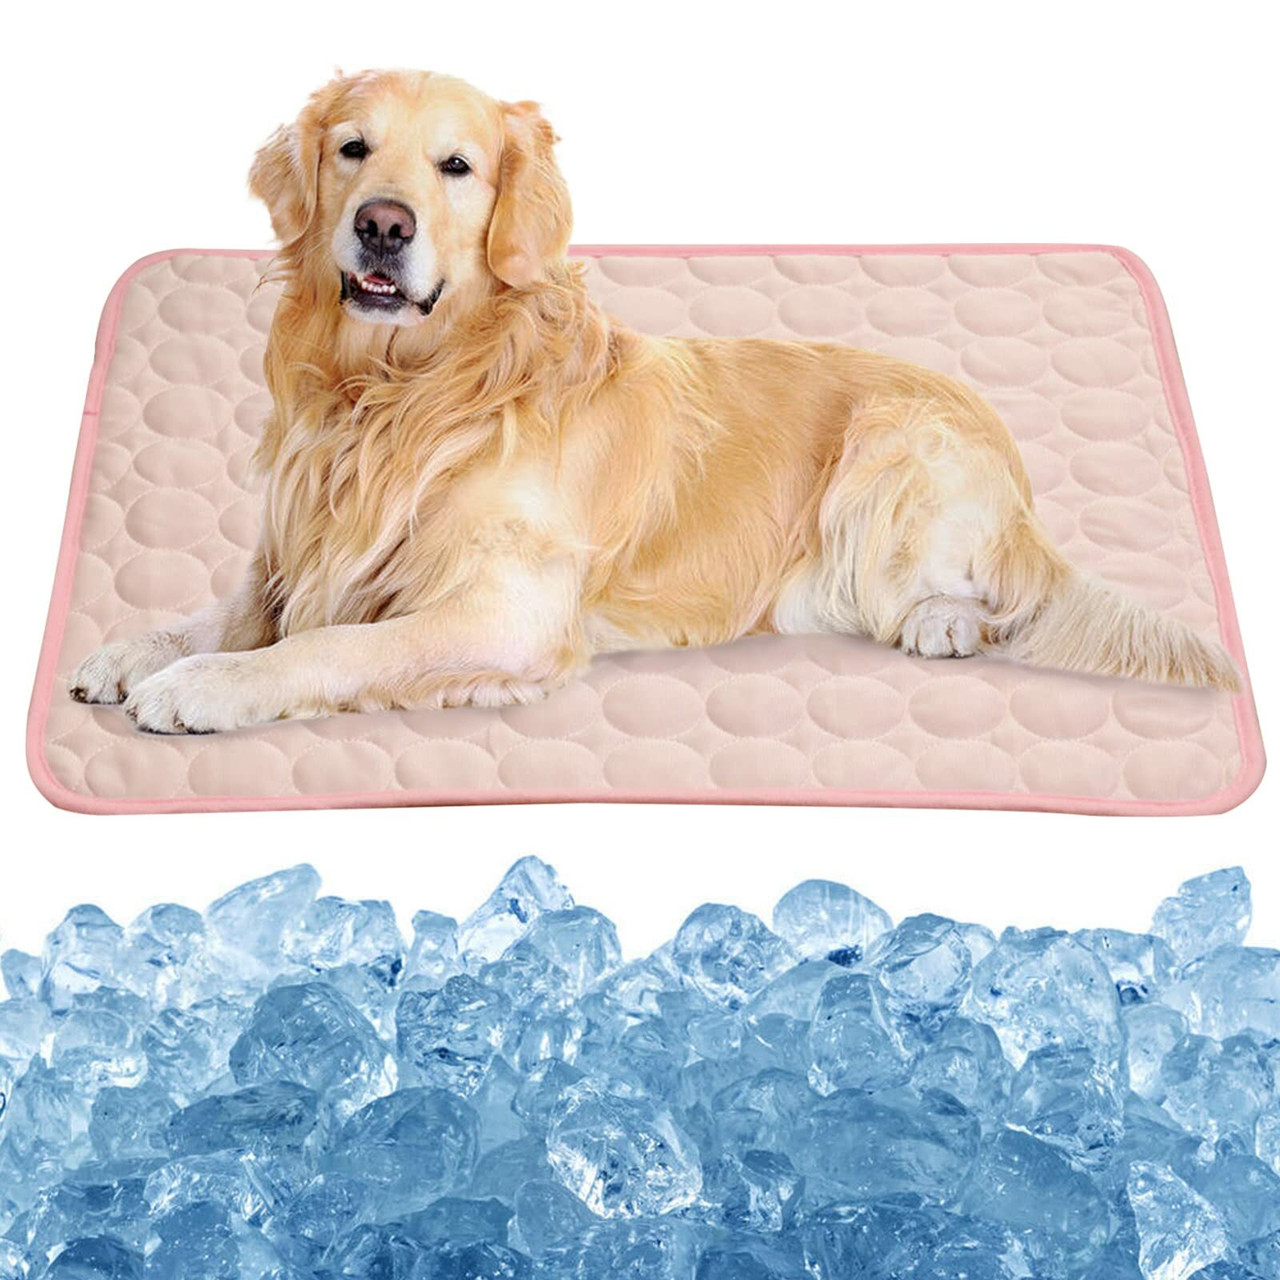 Cooling Beds